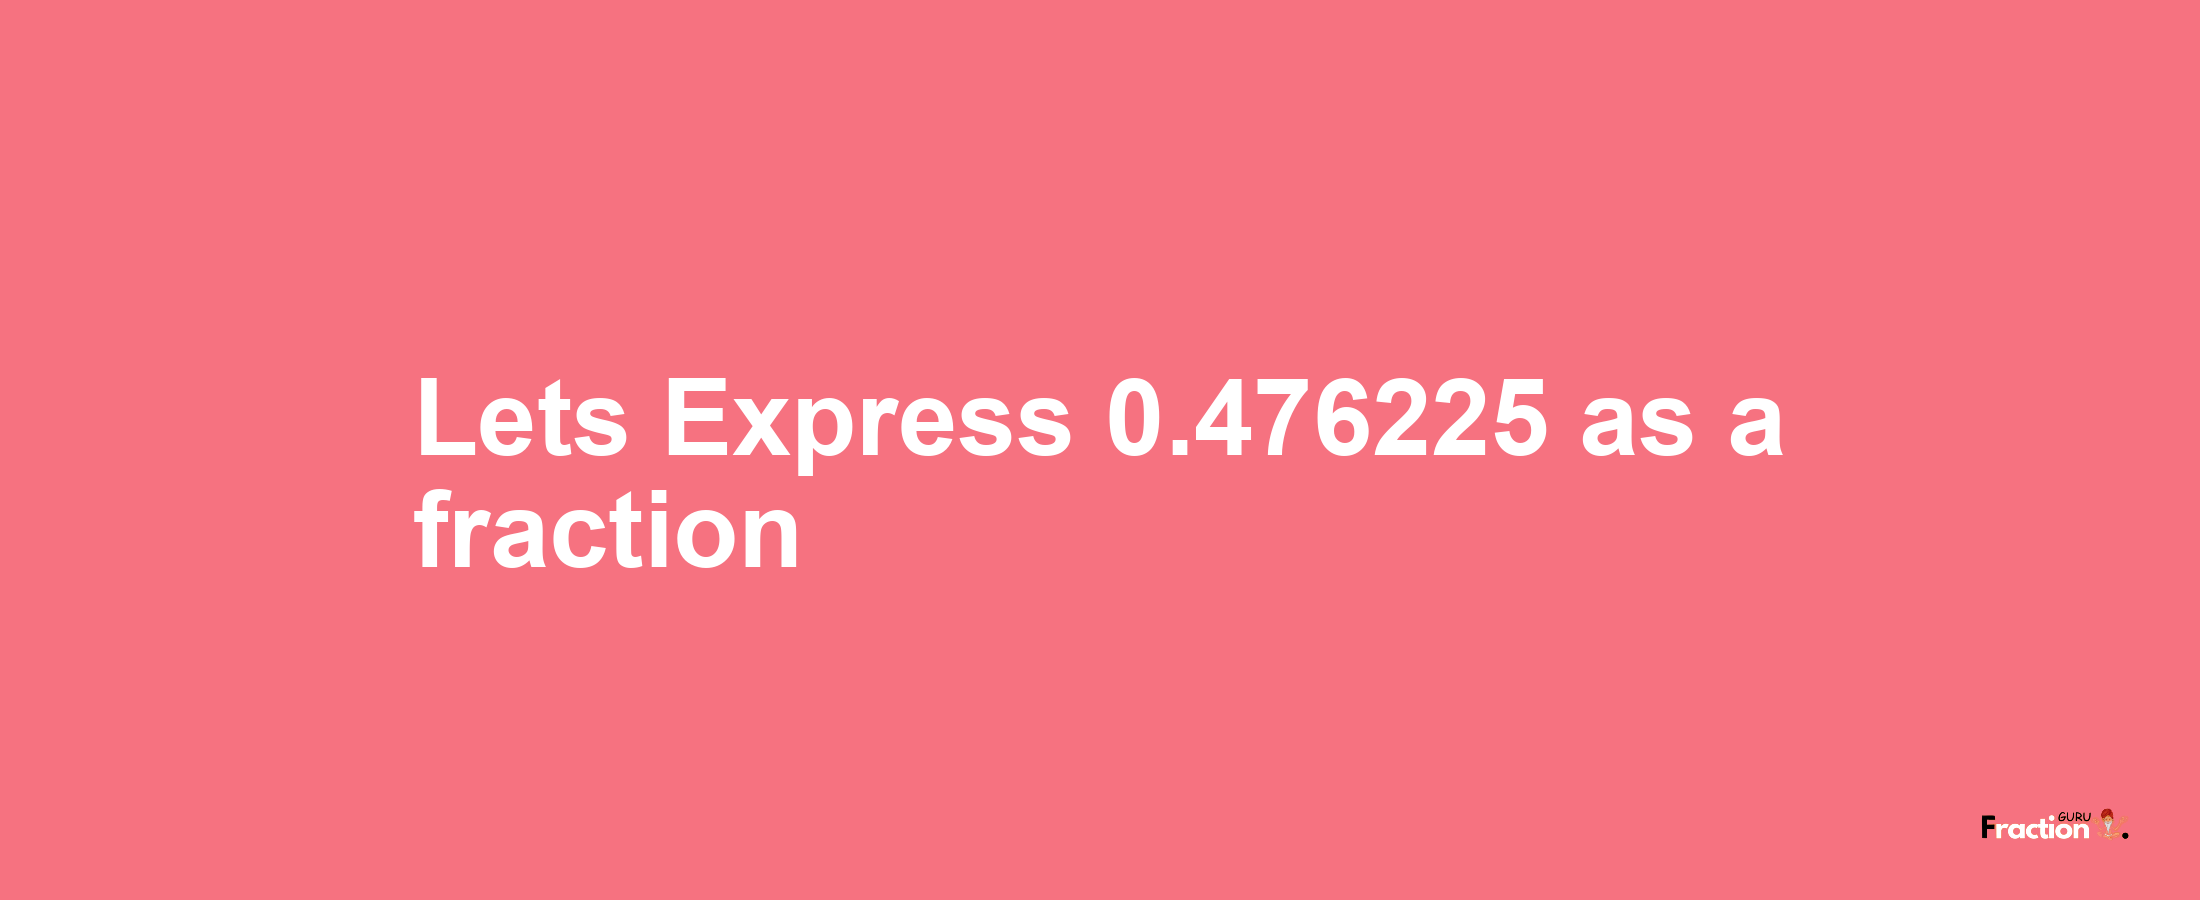 Lets Express 0.476225 as afraction